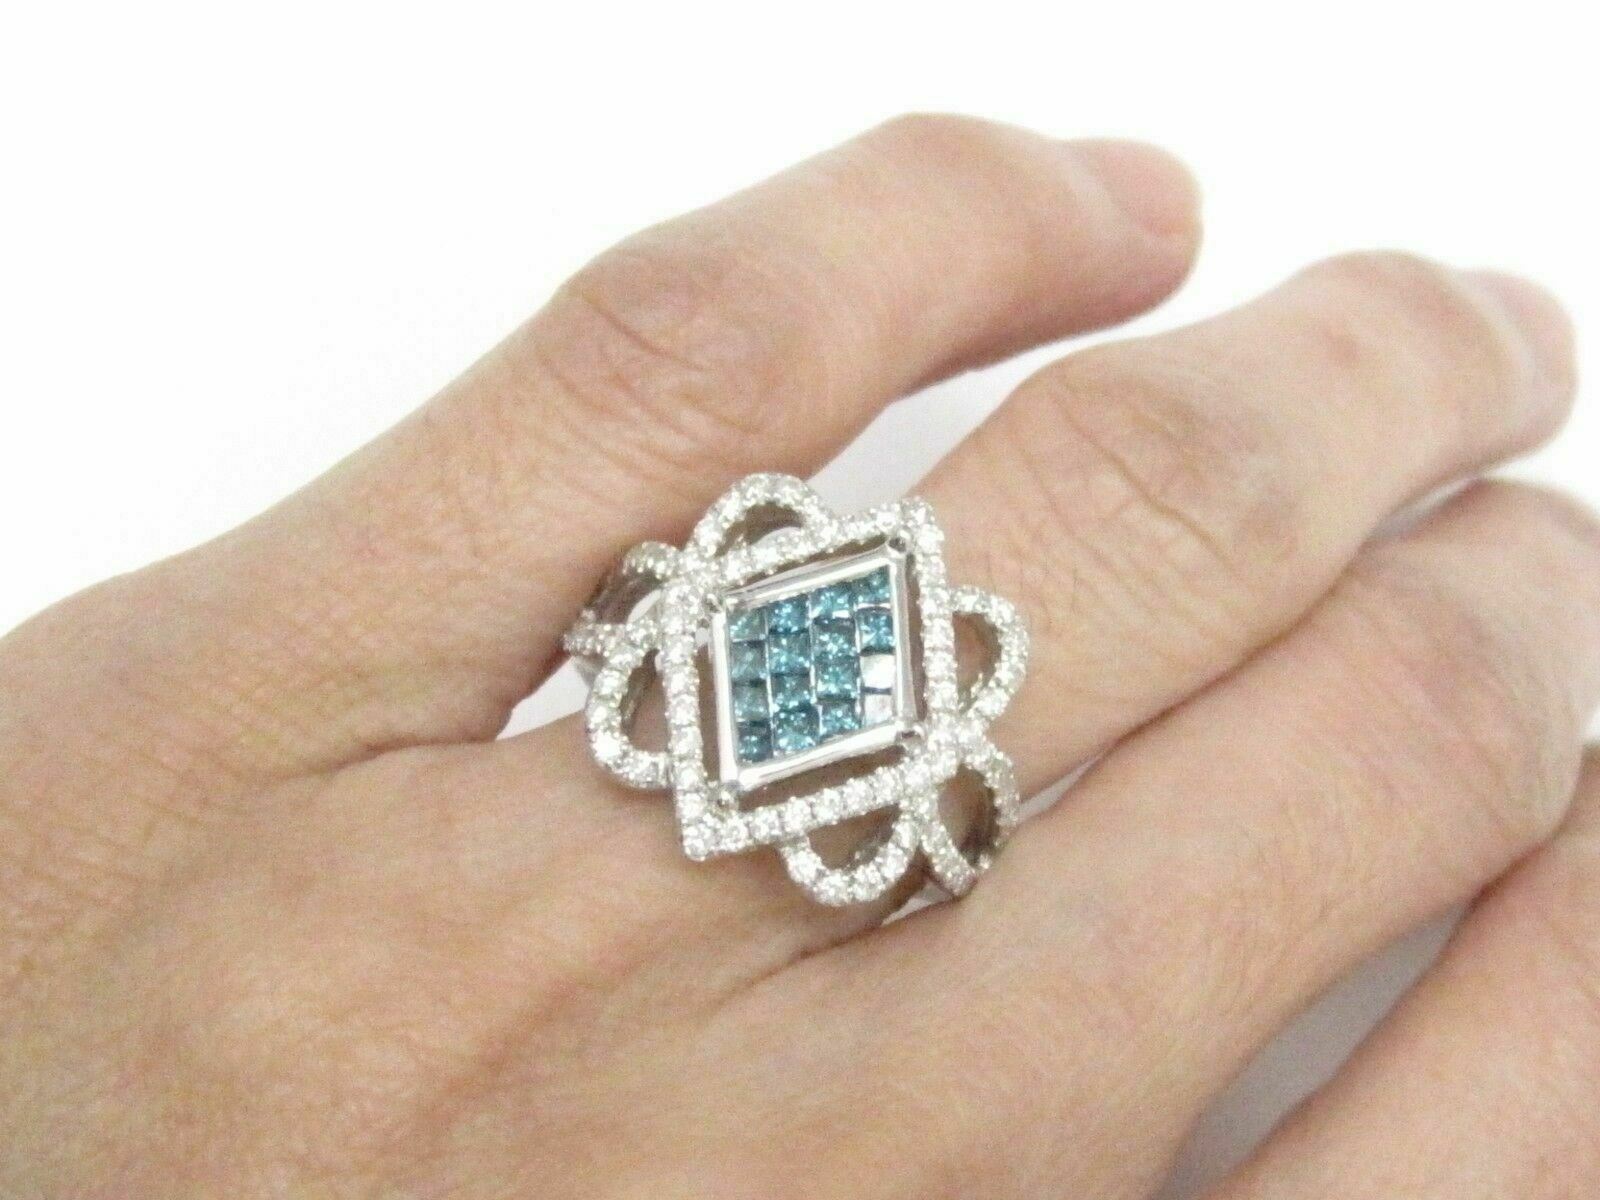 1.30 TCW Natural Round Blue & White Diamonds Square Cocktail Ring Size 7 14kt WG